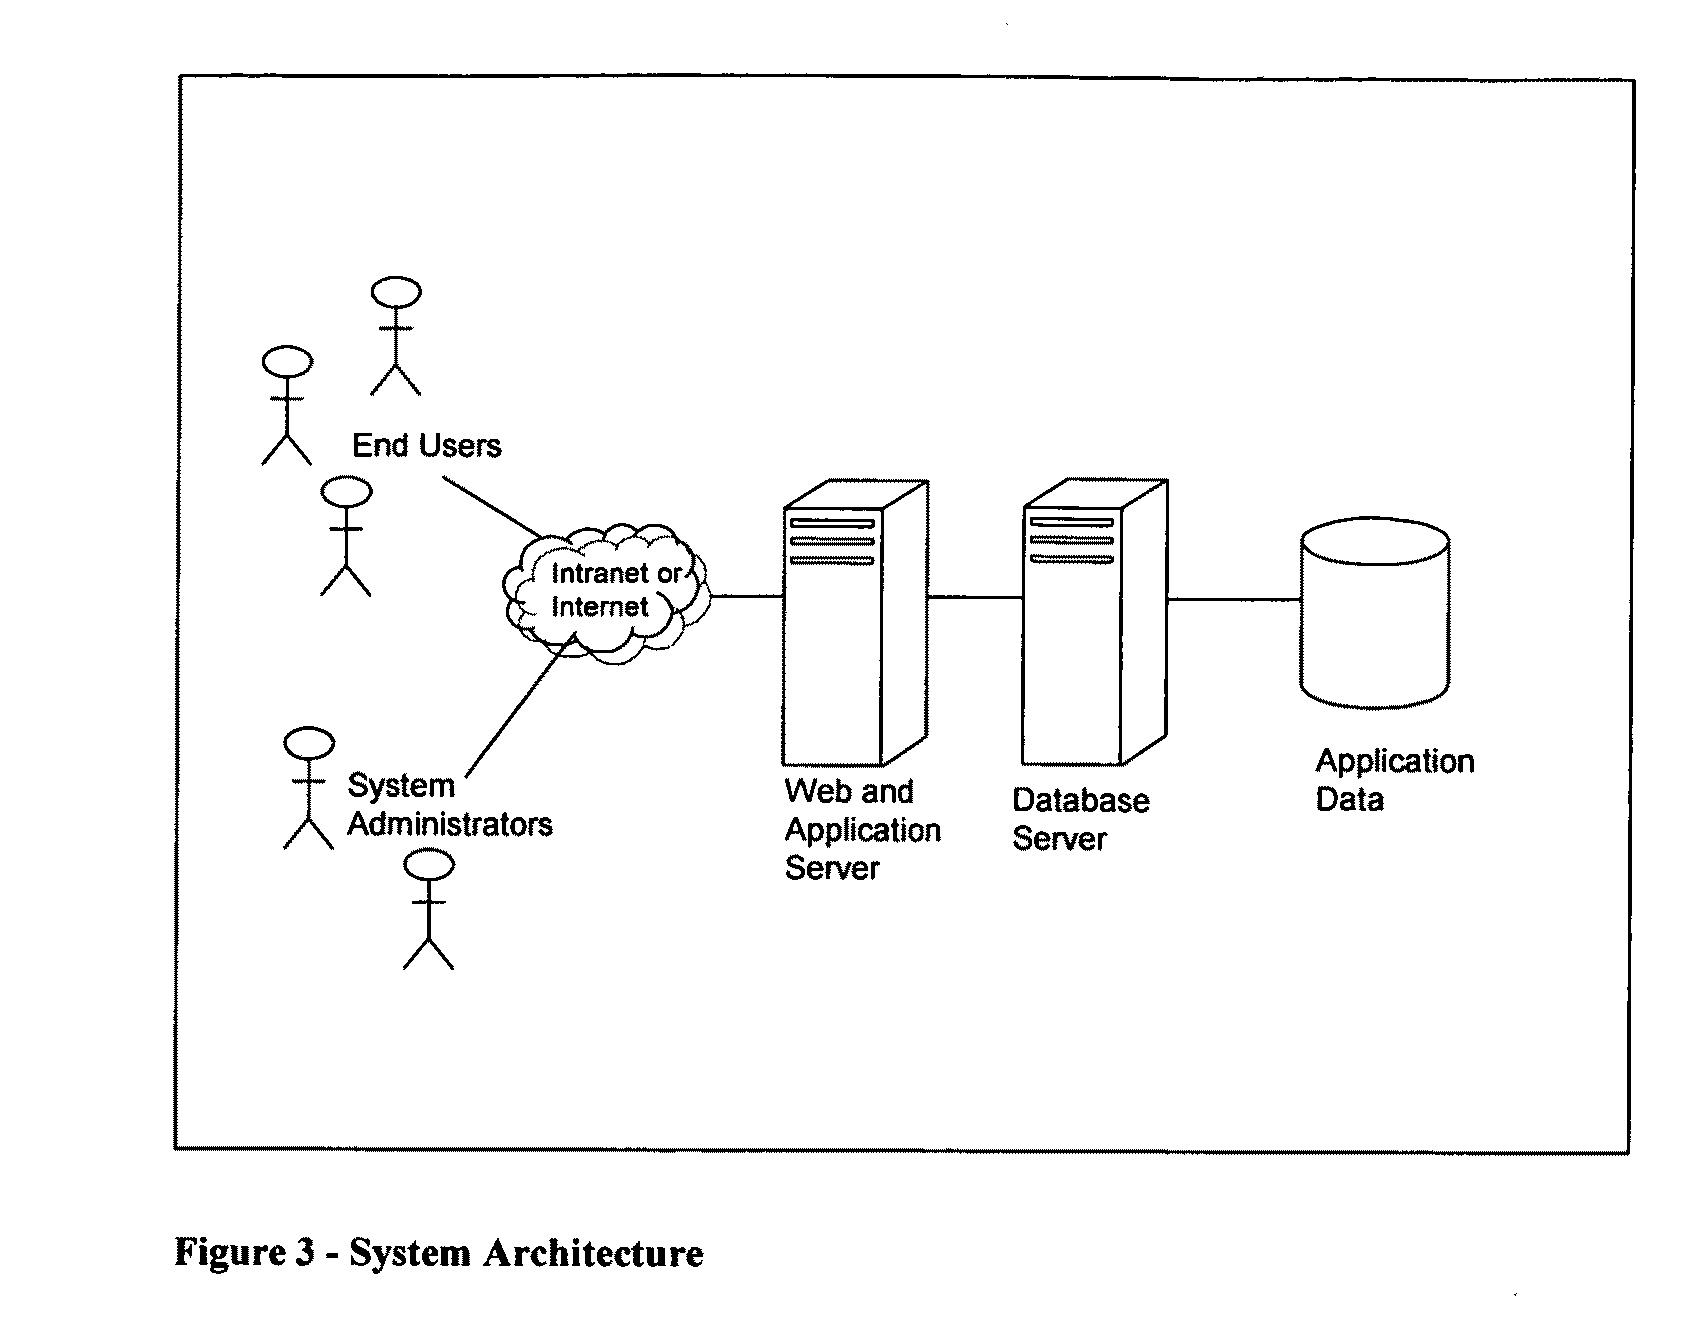 Method and computer system of creating, storing, producing, and distributing examinations